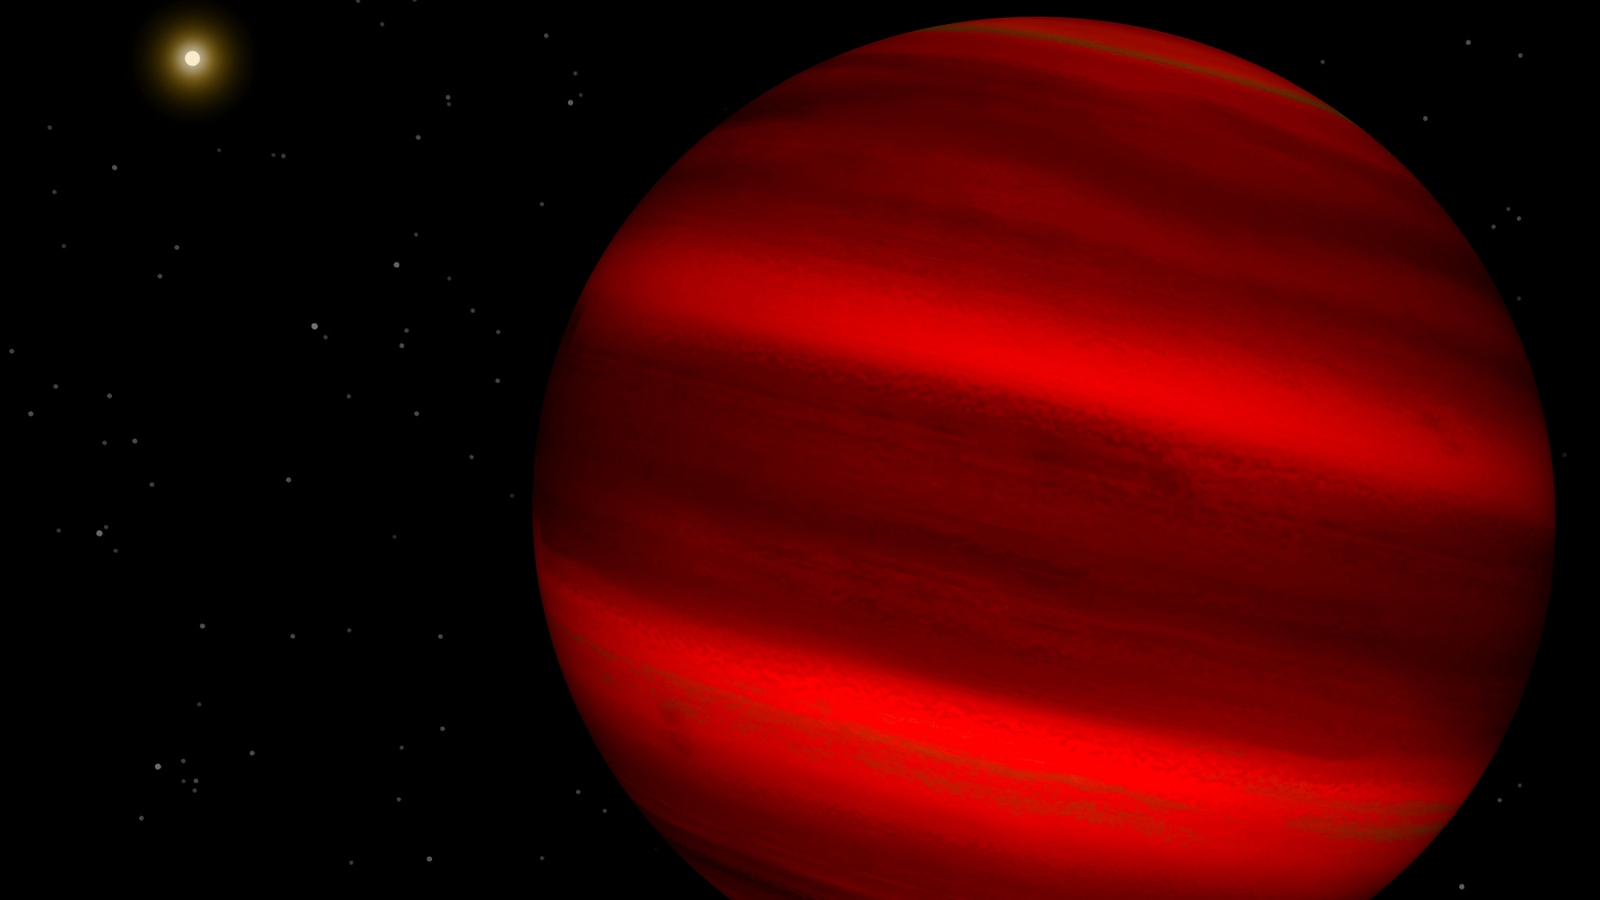 A giant red star with brown streaks across its surface